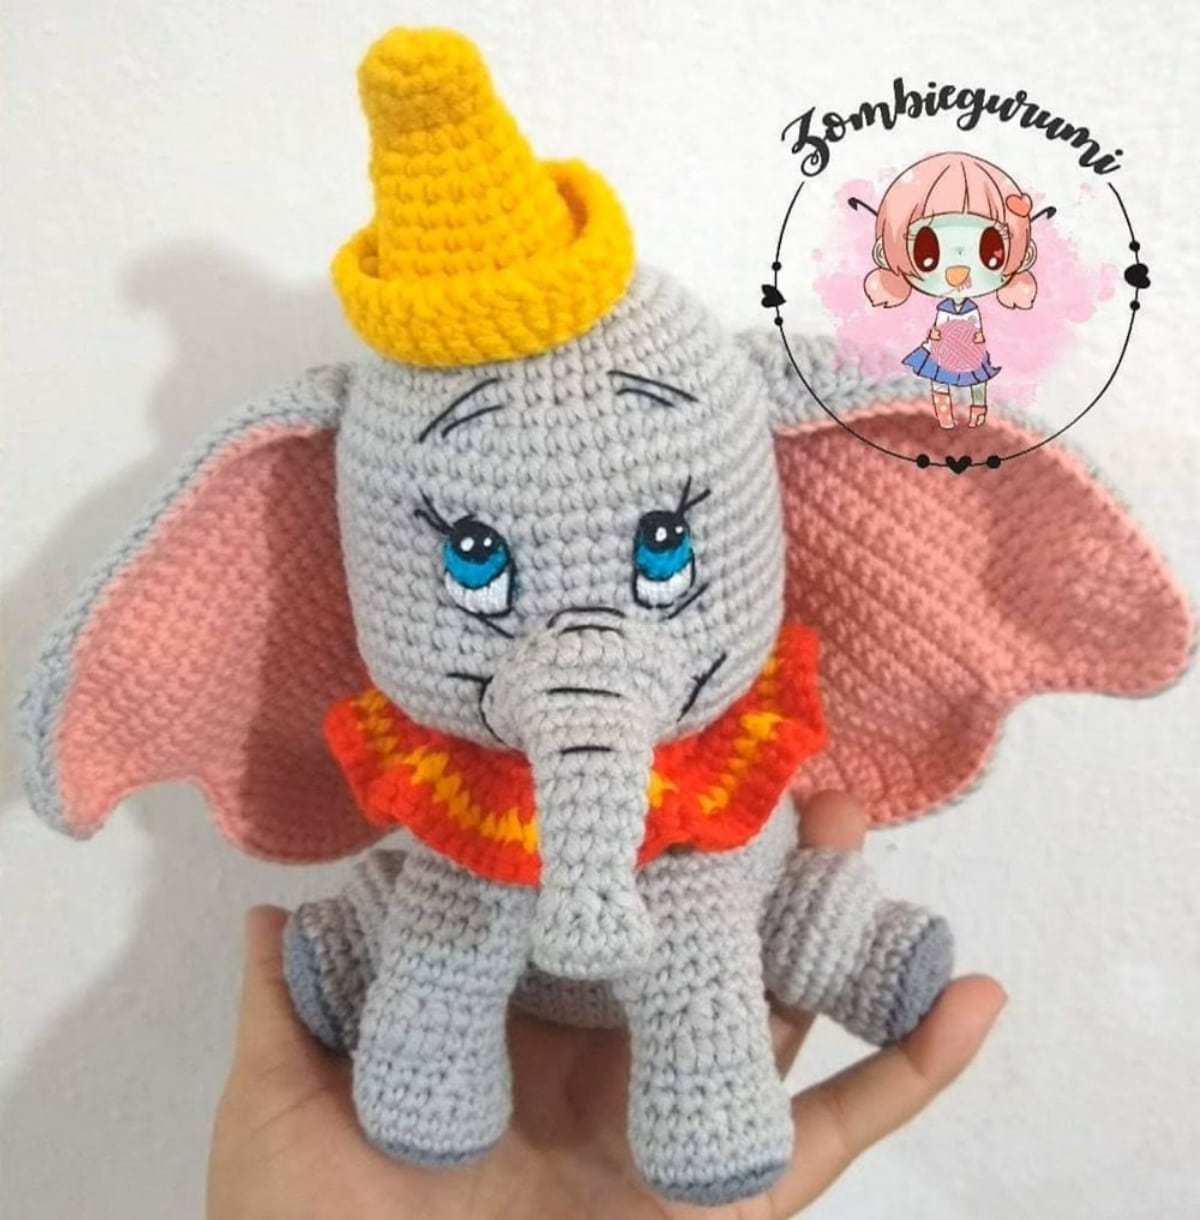 A hand holding a gray crochet Dumbo with large pink ears, a small yellow hat, and pink and orange ruffle around its neck.